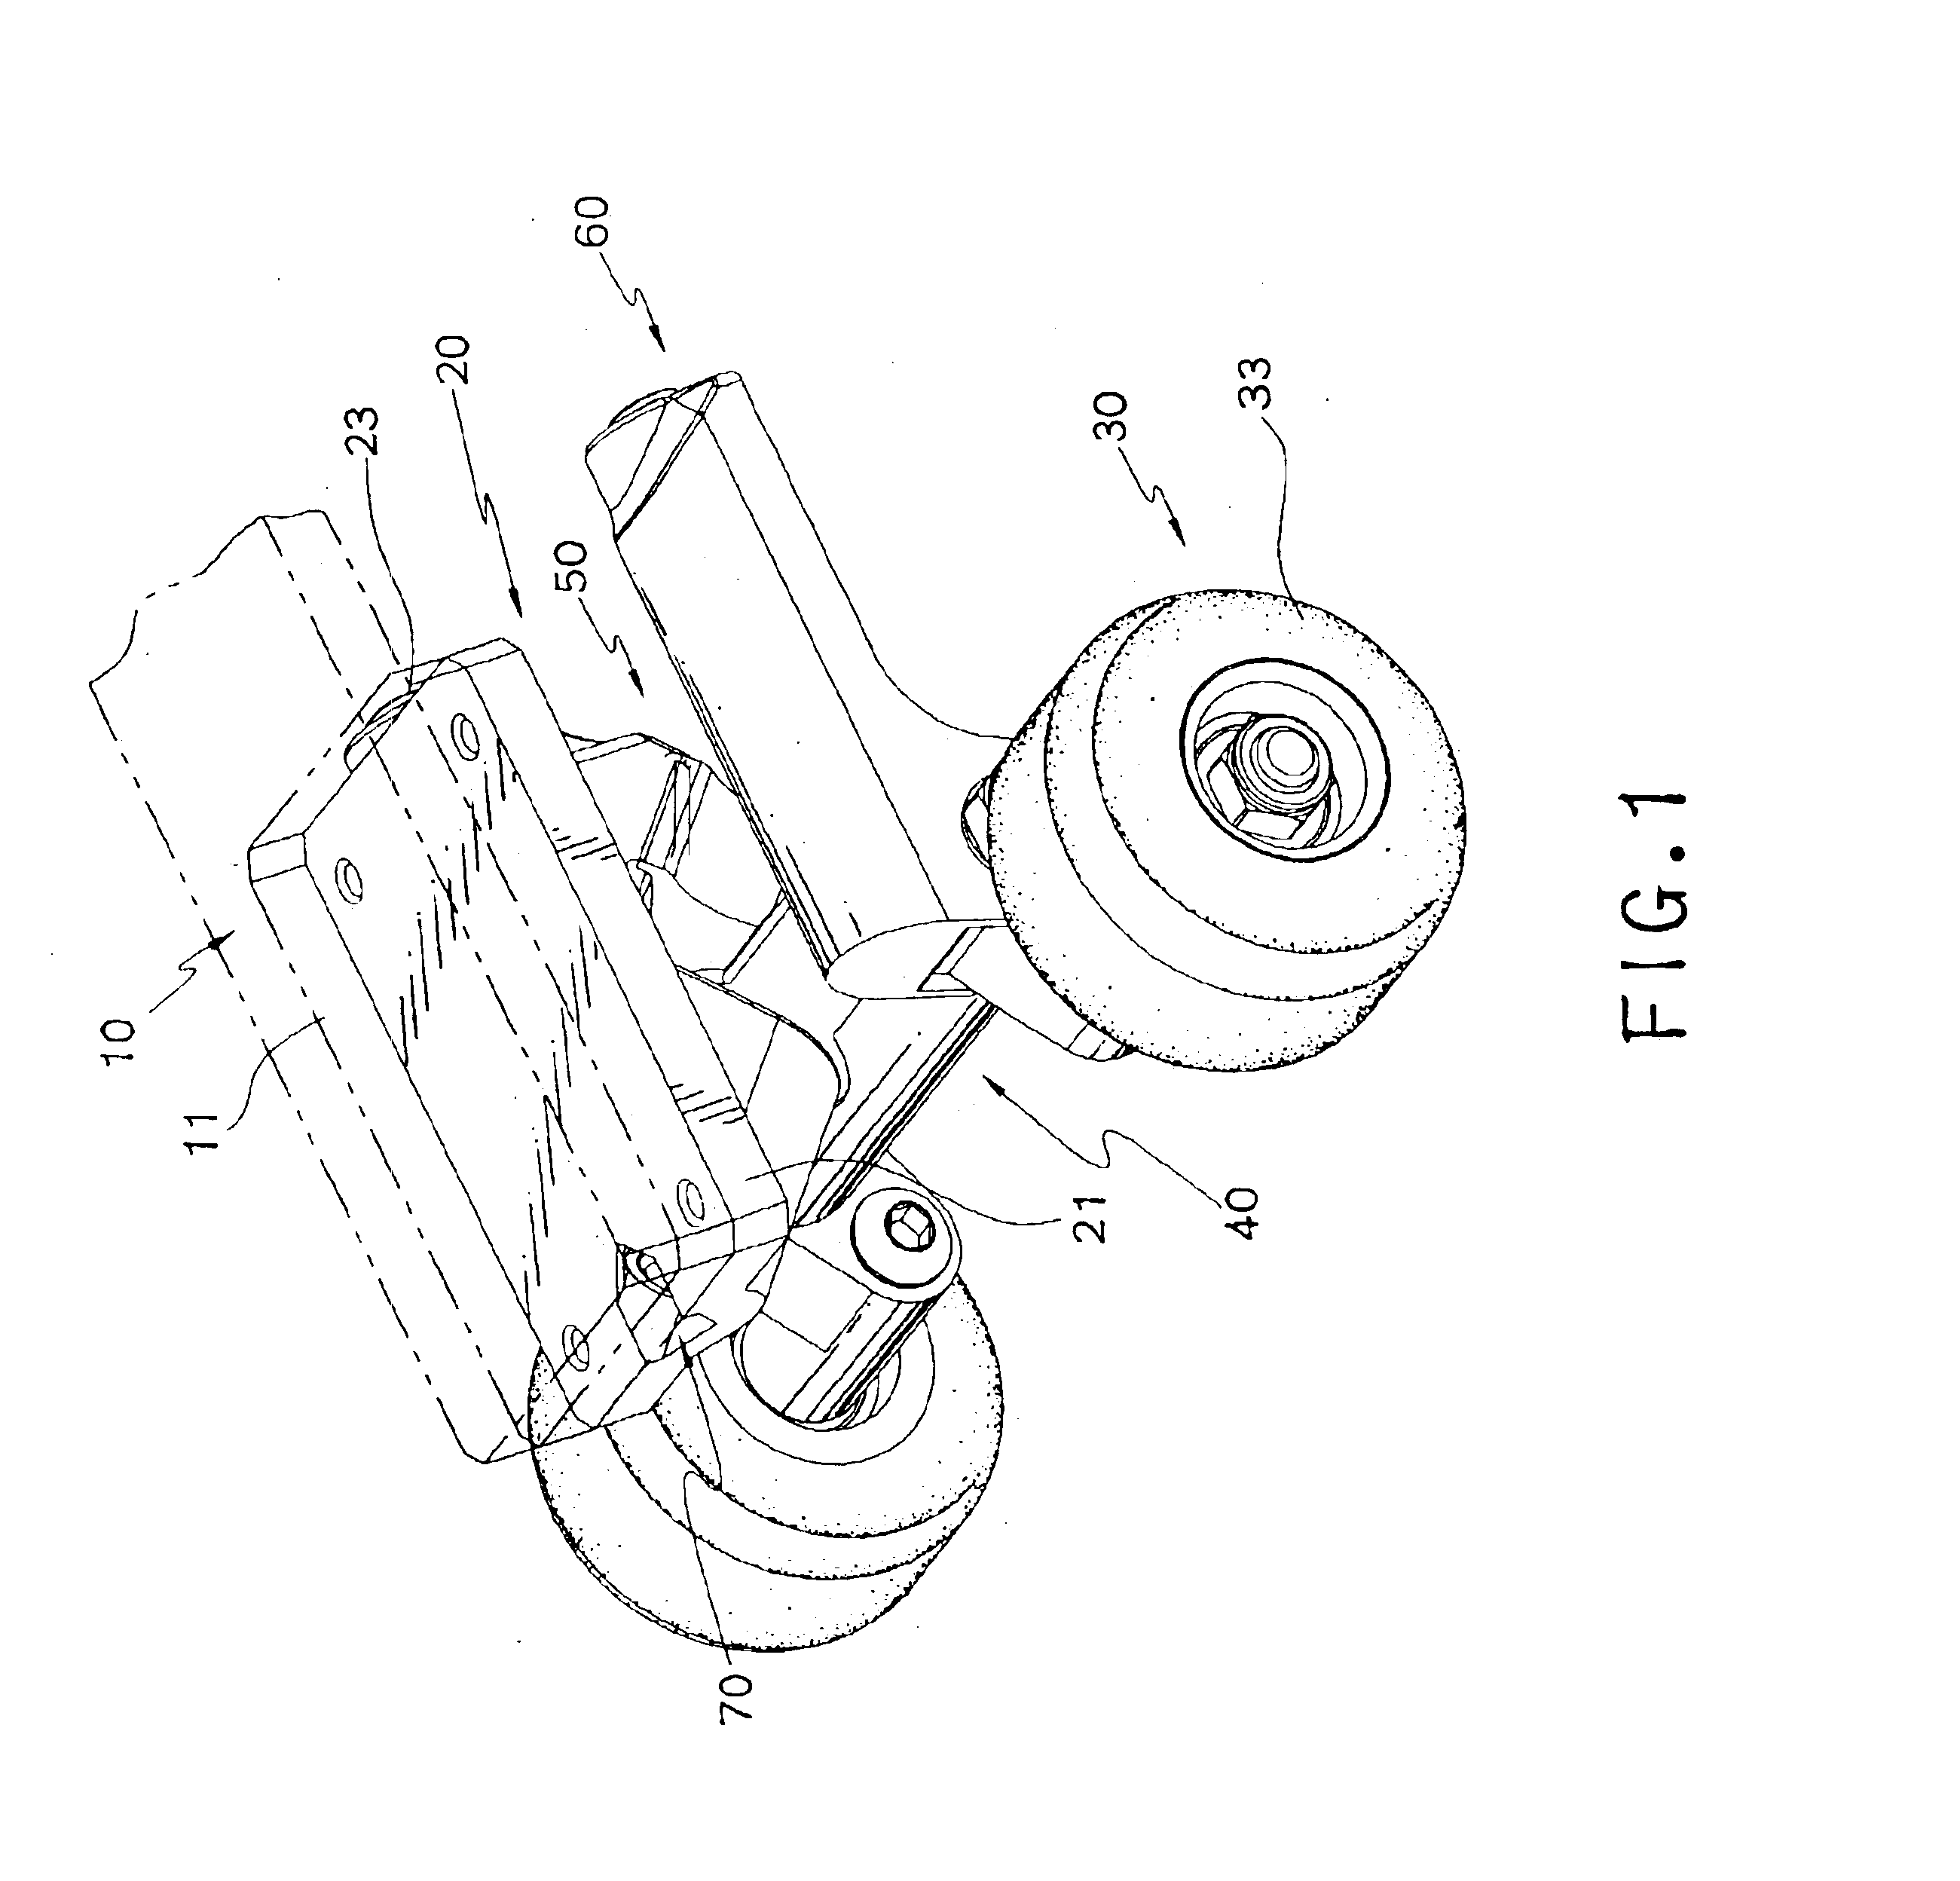 Skateboard having a three-dimensional independent suspension balance system